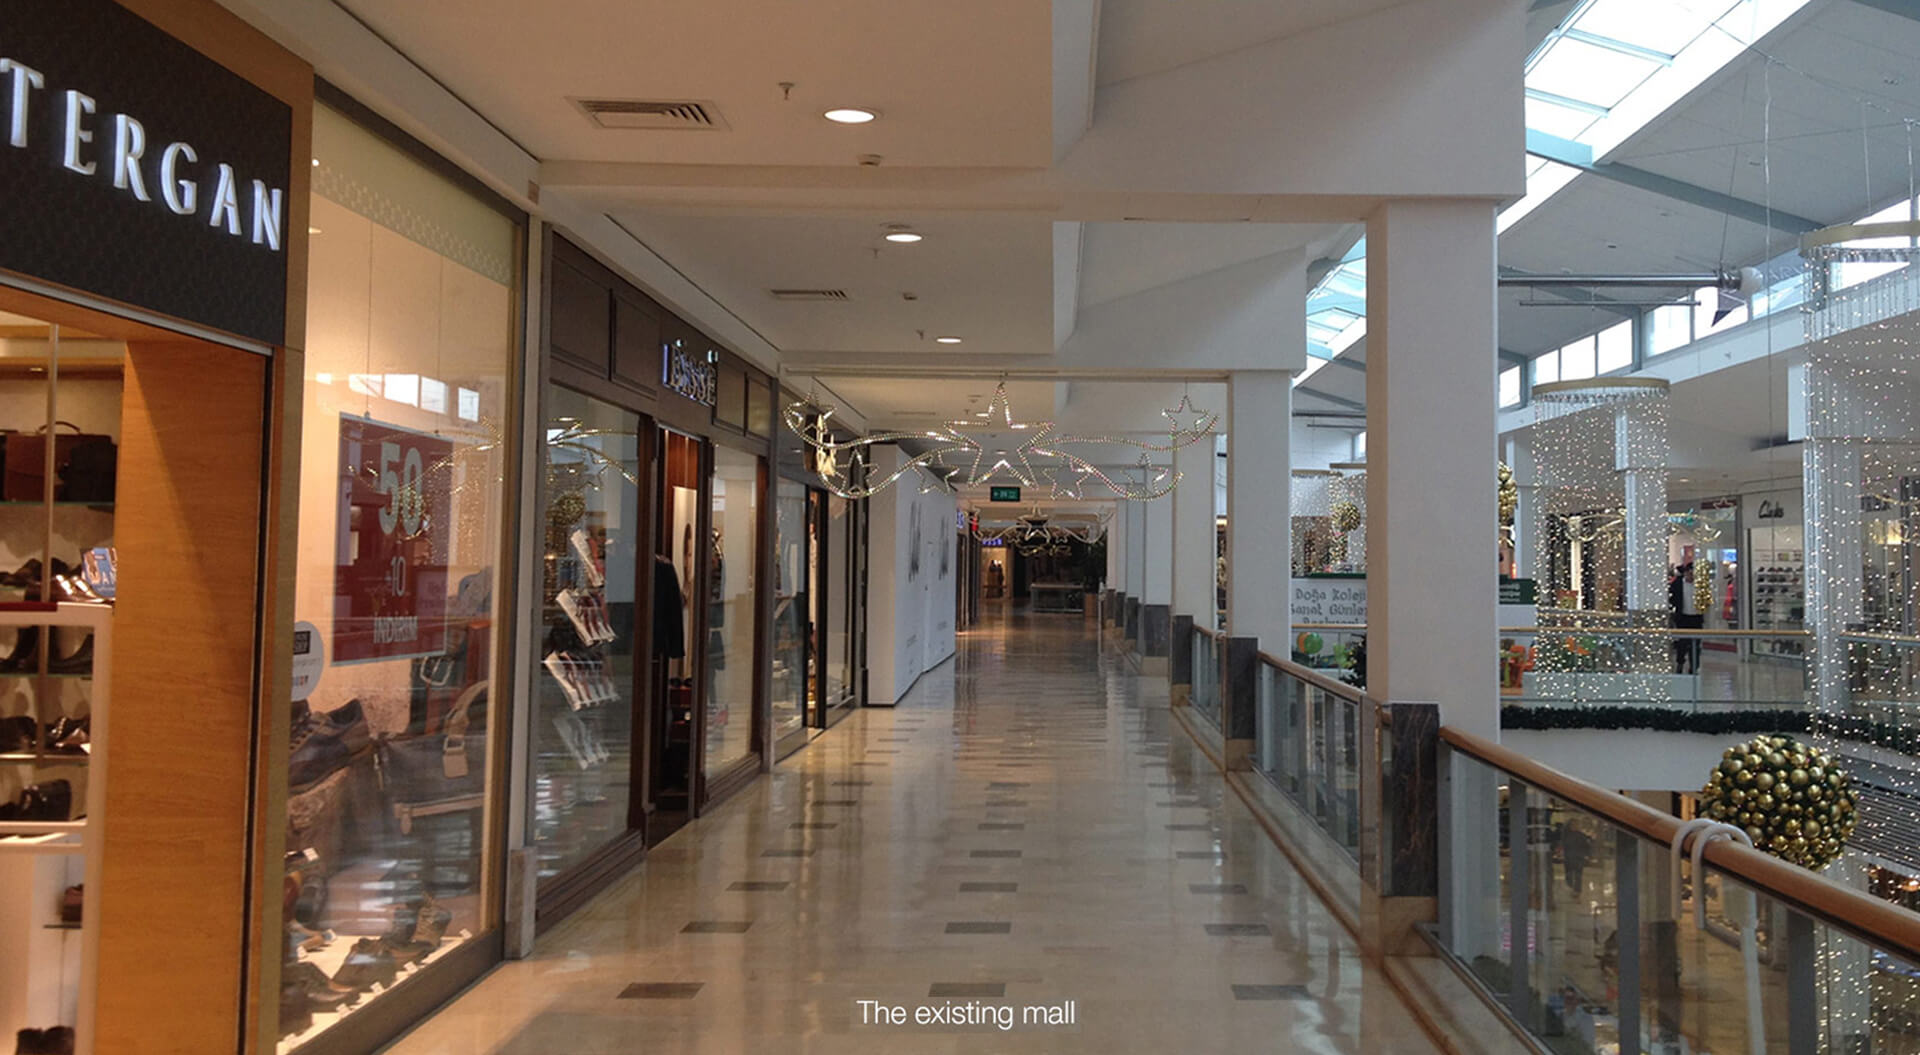 Icerenkoy shopping mall Istanbul interior design existing mall